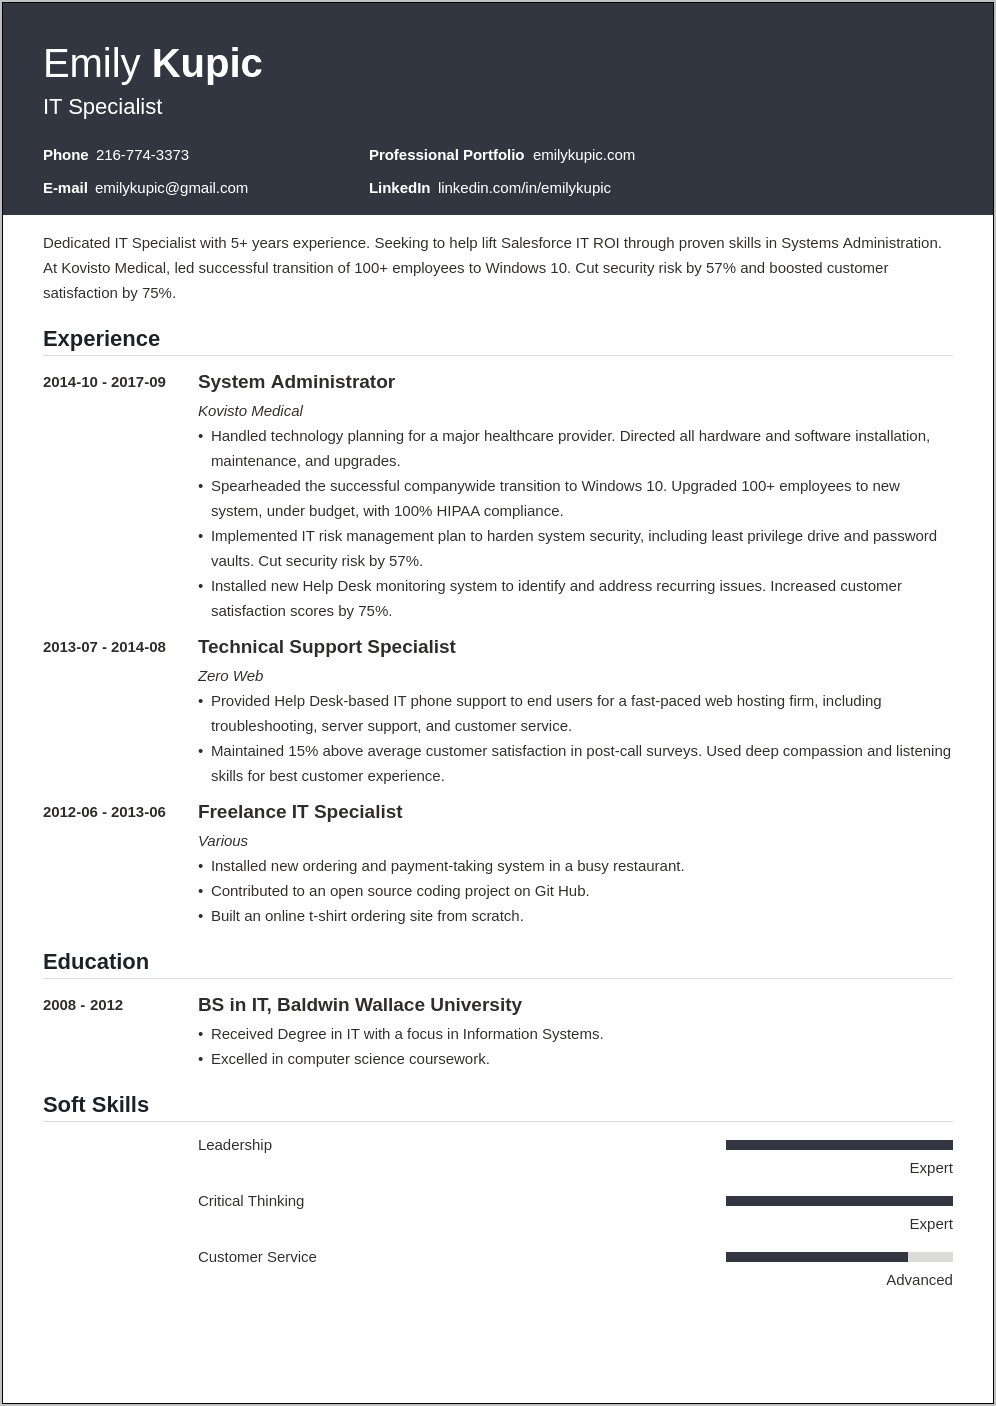 Some Technical Experience For A Resume